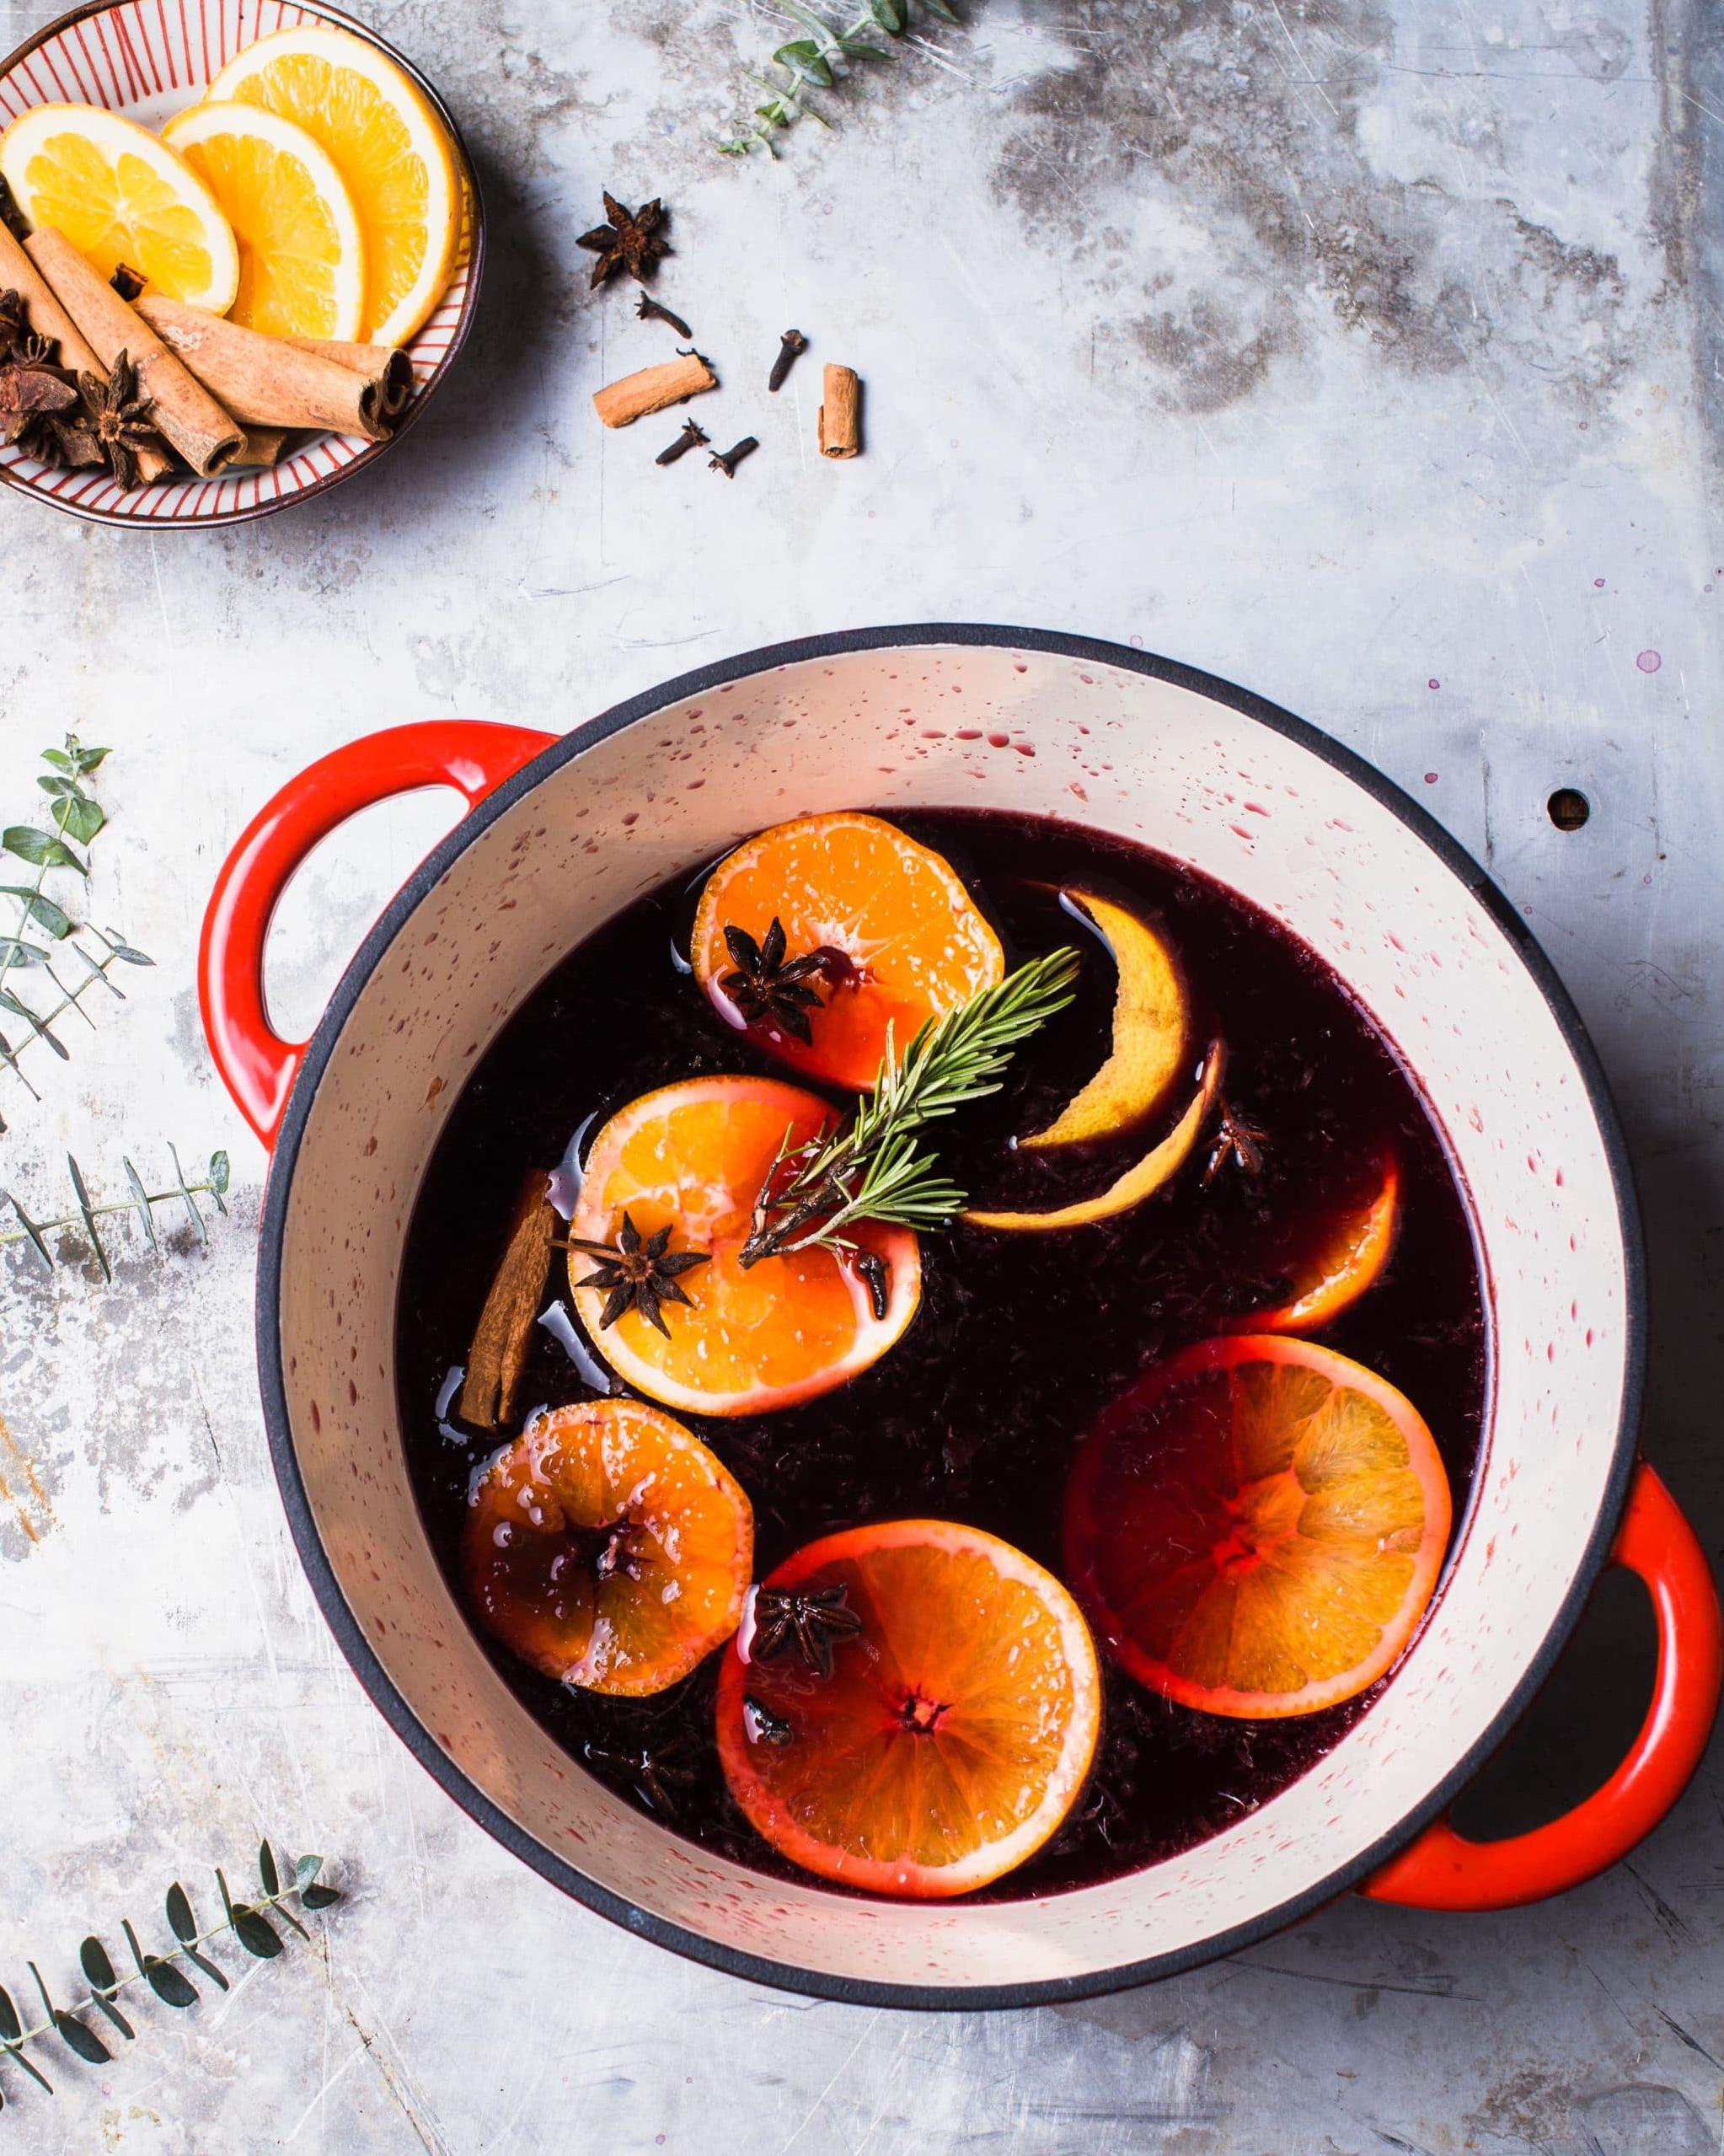  This easy recipe for Spiced Orange Wine is sure to impress your holiday guests.